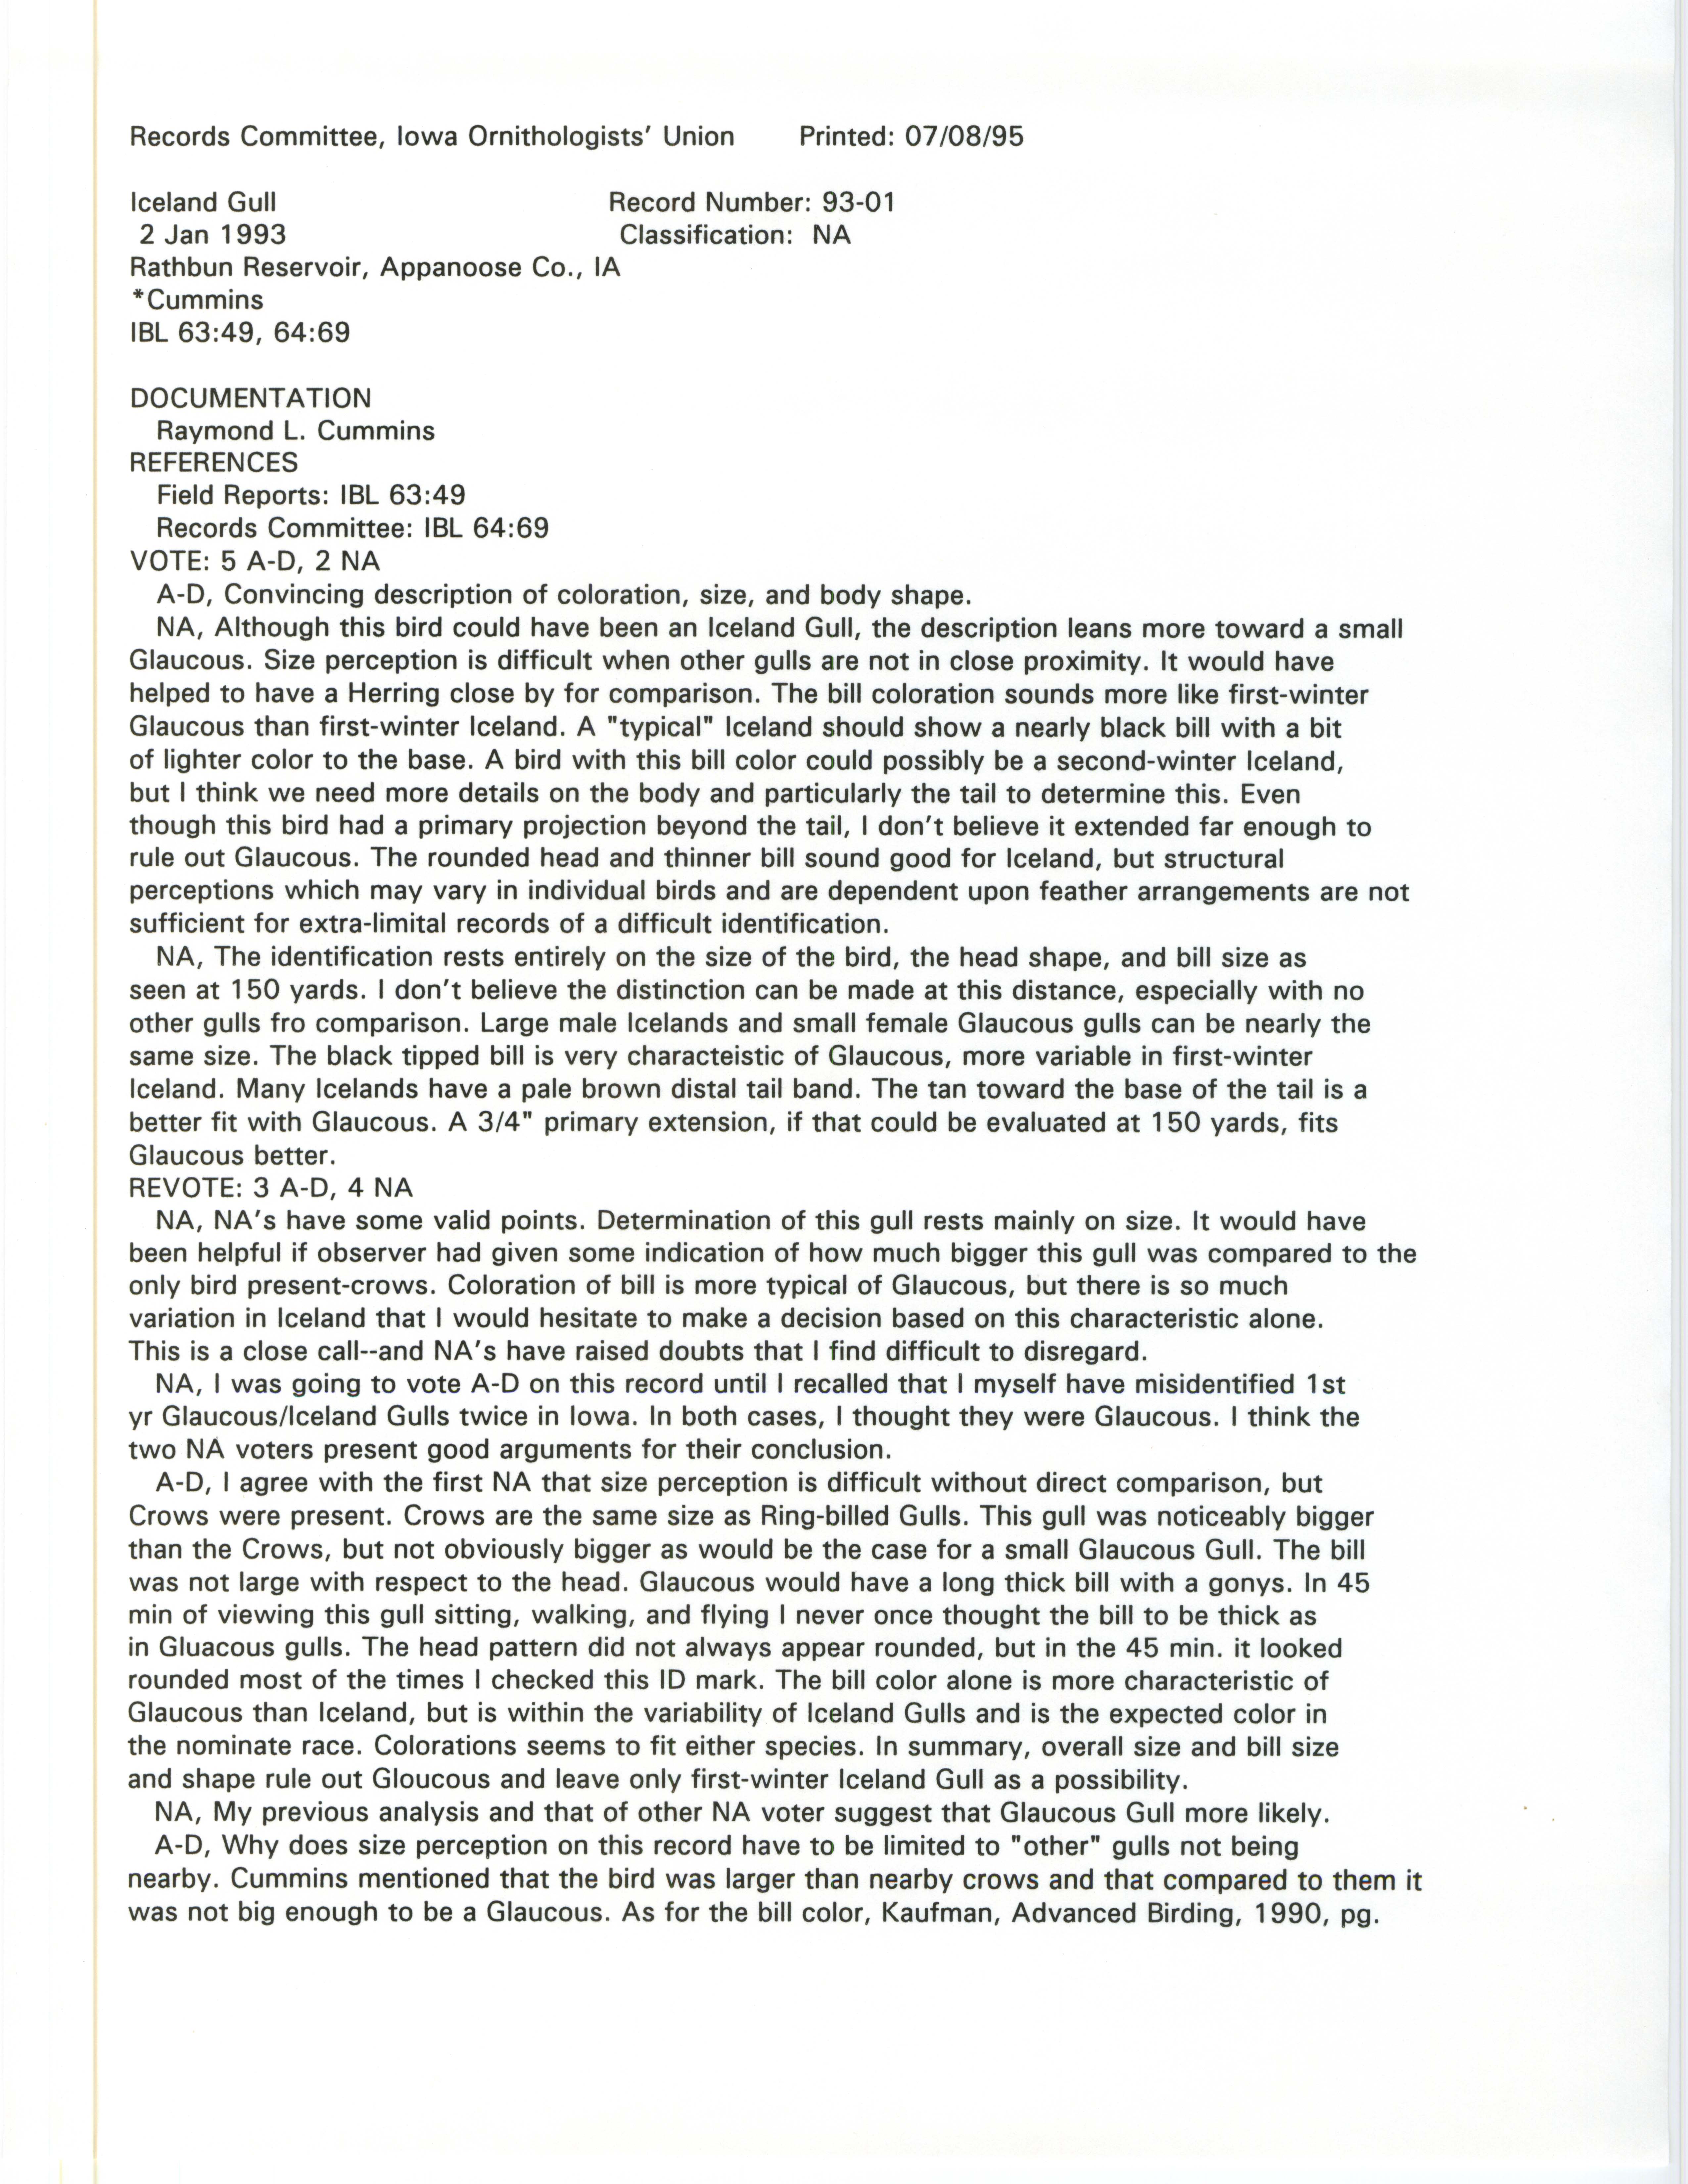 Records Committee review for rare bird sighting of Iceland Gull at Lake Rathbun Dam, 1993